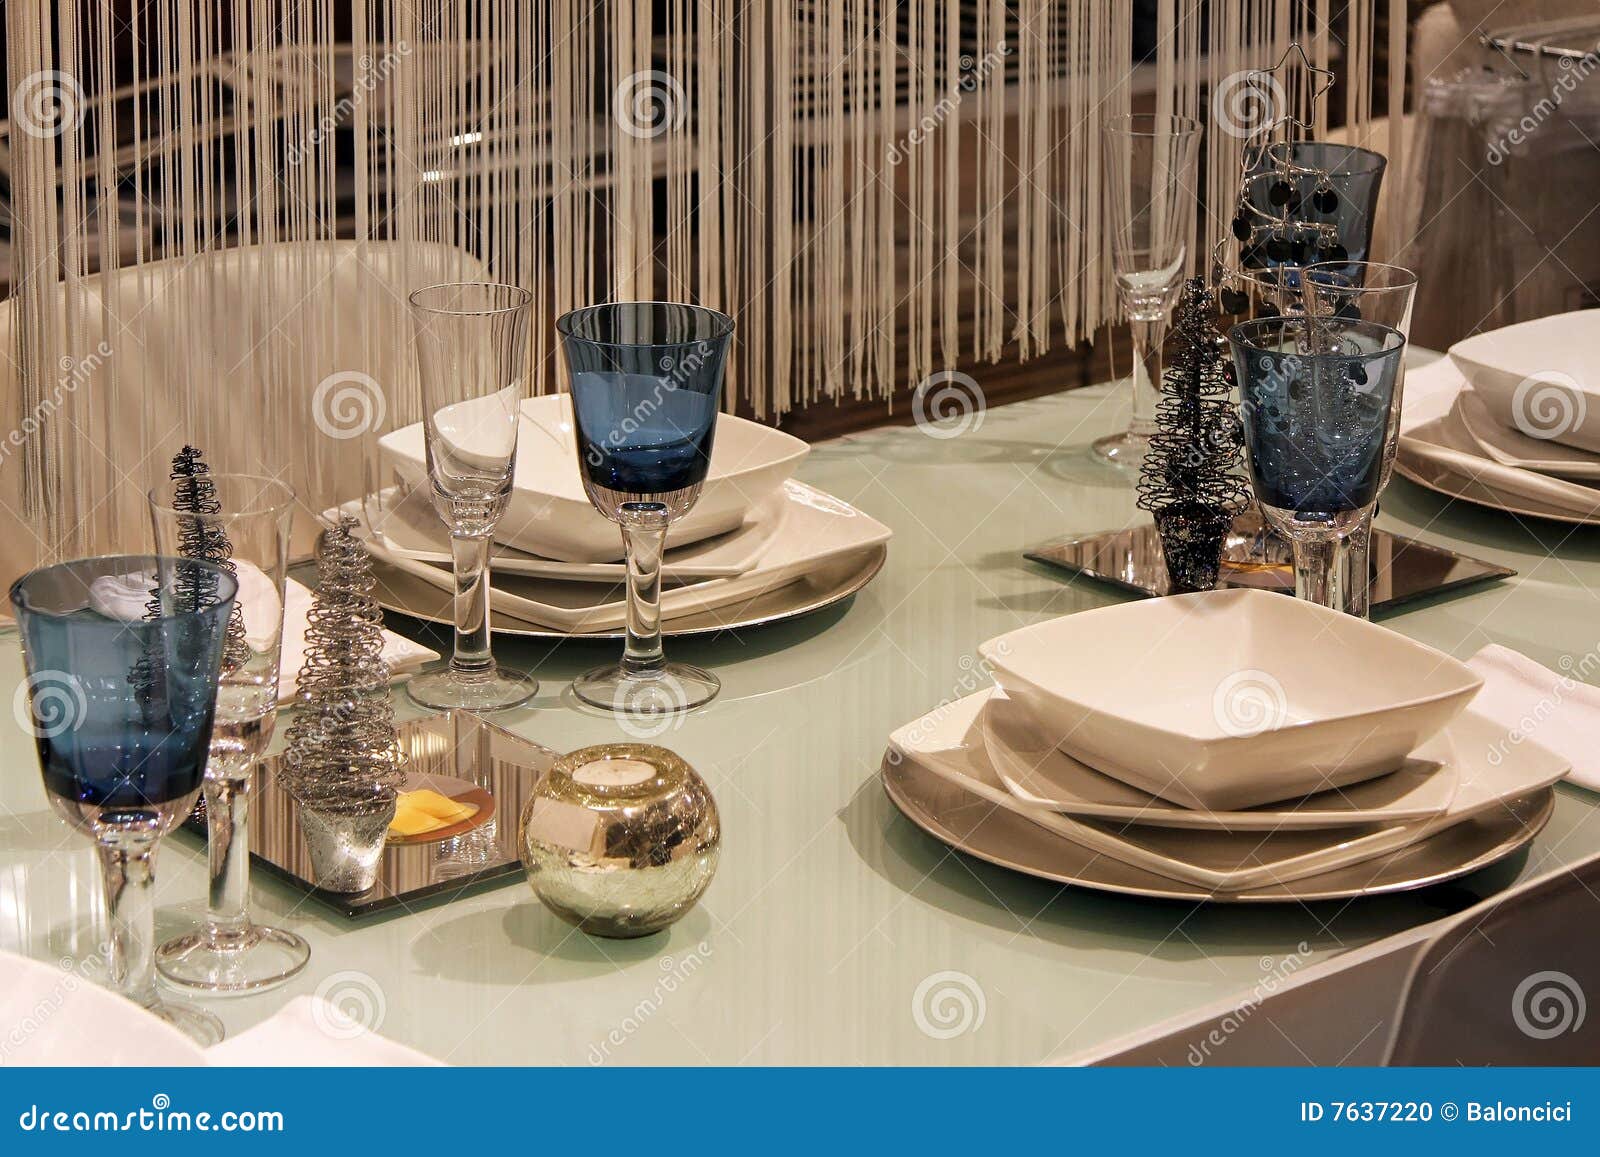 Contemporary table stock photo. Image of lunch, glass - 7637220